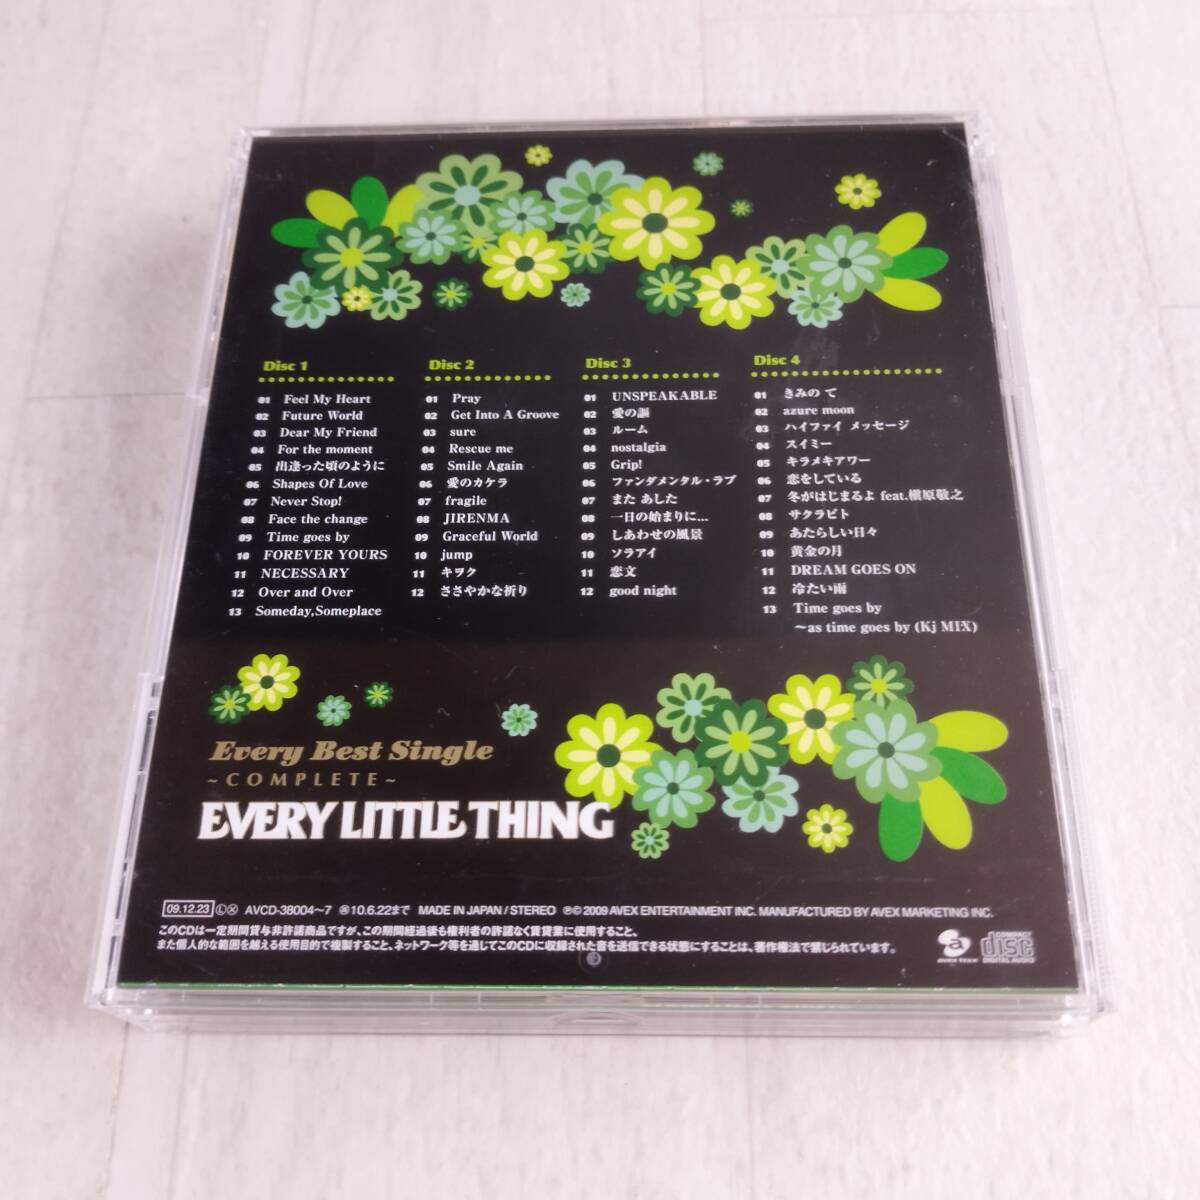 2C11 CD EVERY LITTLE THING Every Best Singles COMPLETE